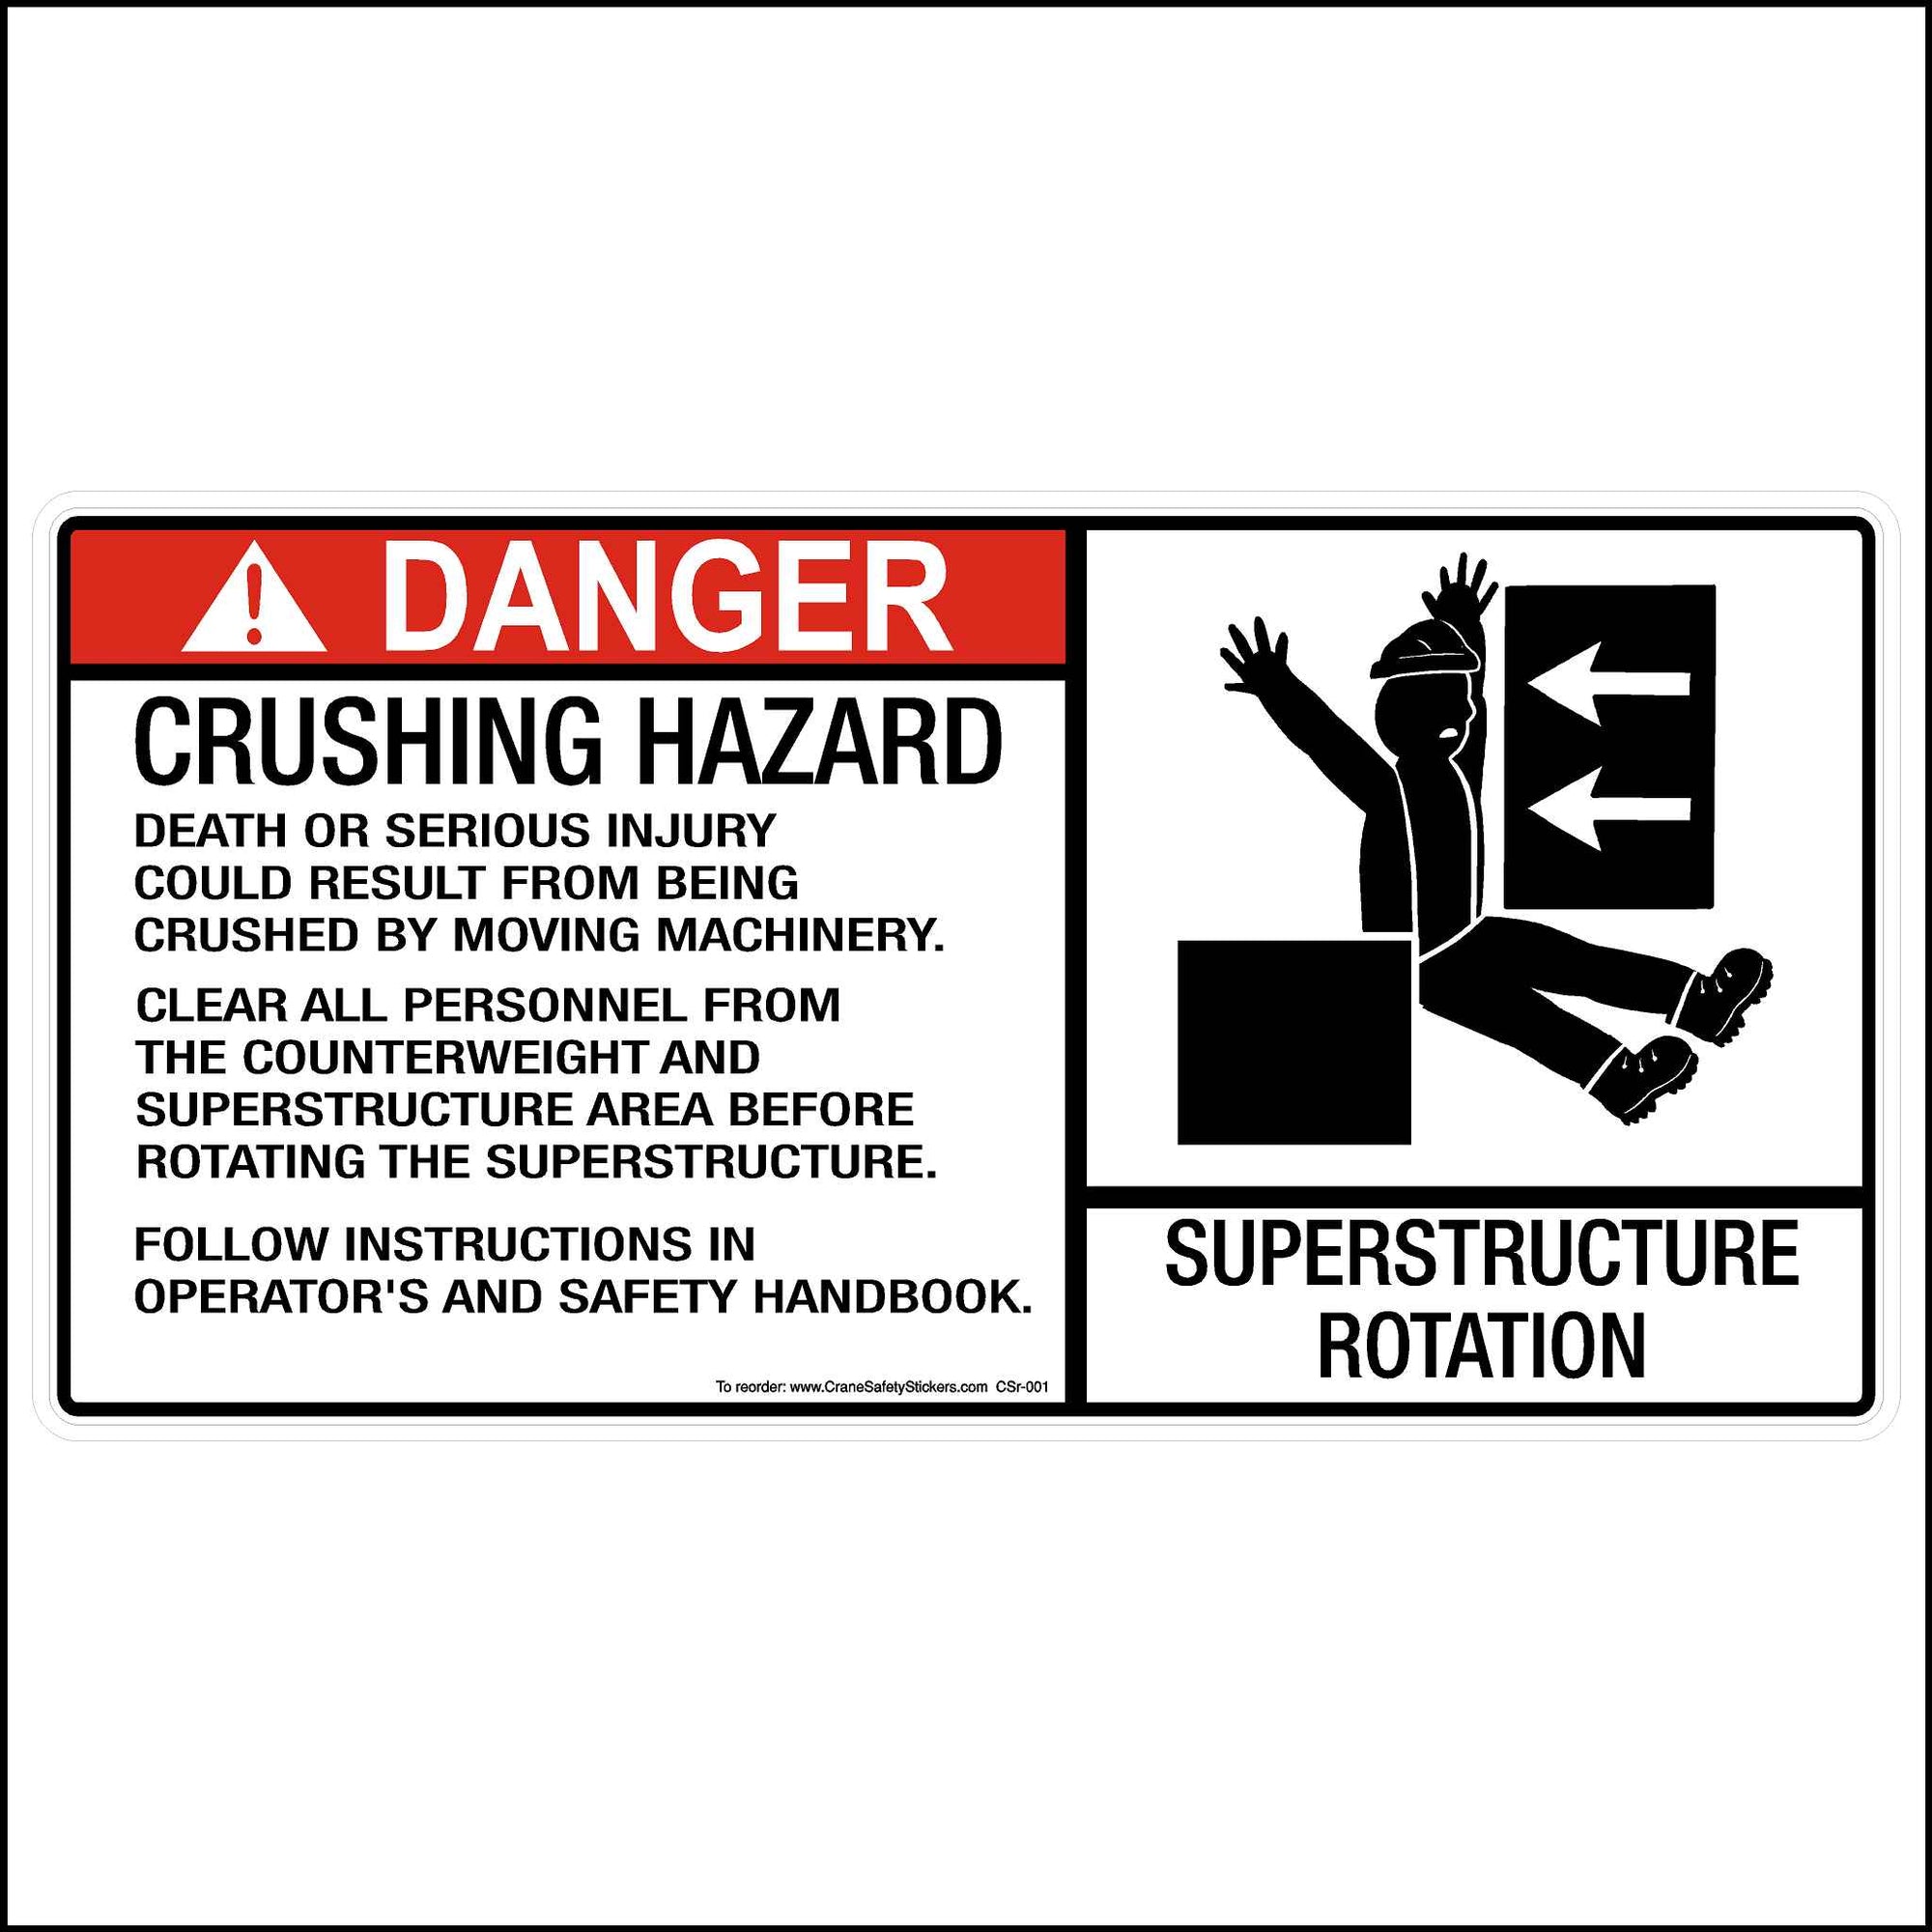 Crane Superstructure Rotation Hazard Sticker Printed With, DANGER Crushing Hazard. Death Or Serious Injury Could Result From Being Crushed By Moving Machinery. Clear All Personnel From The Counterweight And Superstructure Area Before Rotating The Superstructure. Follow Instructions In Operator's And Safety Handbook.